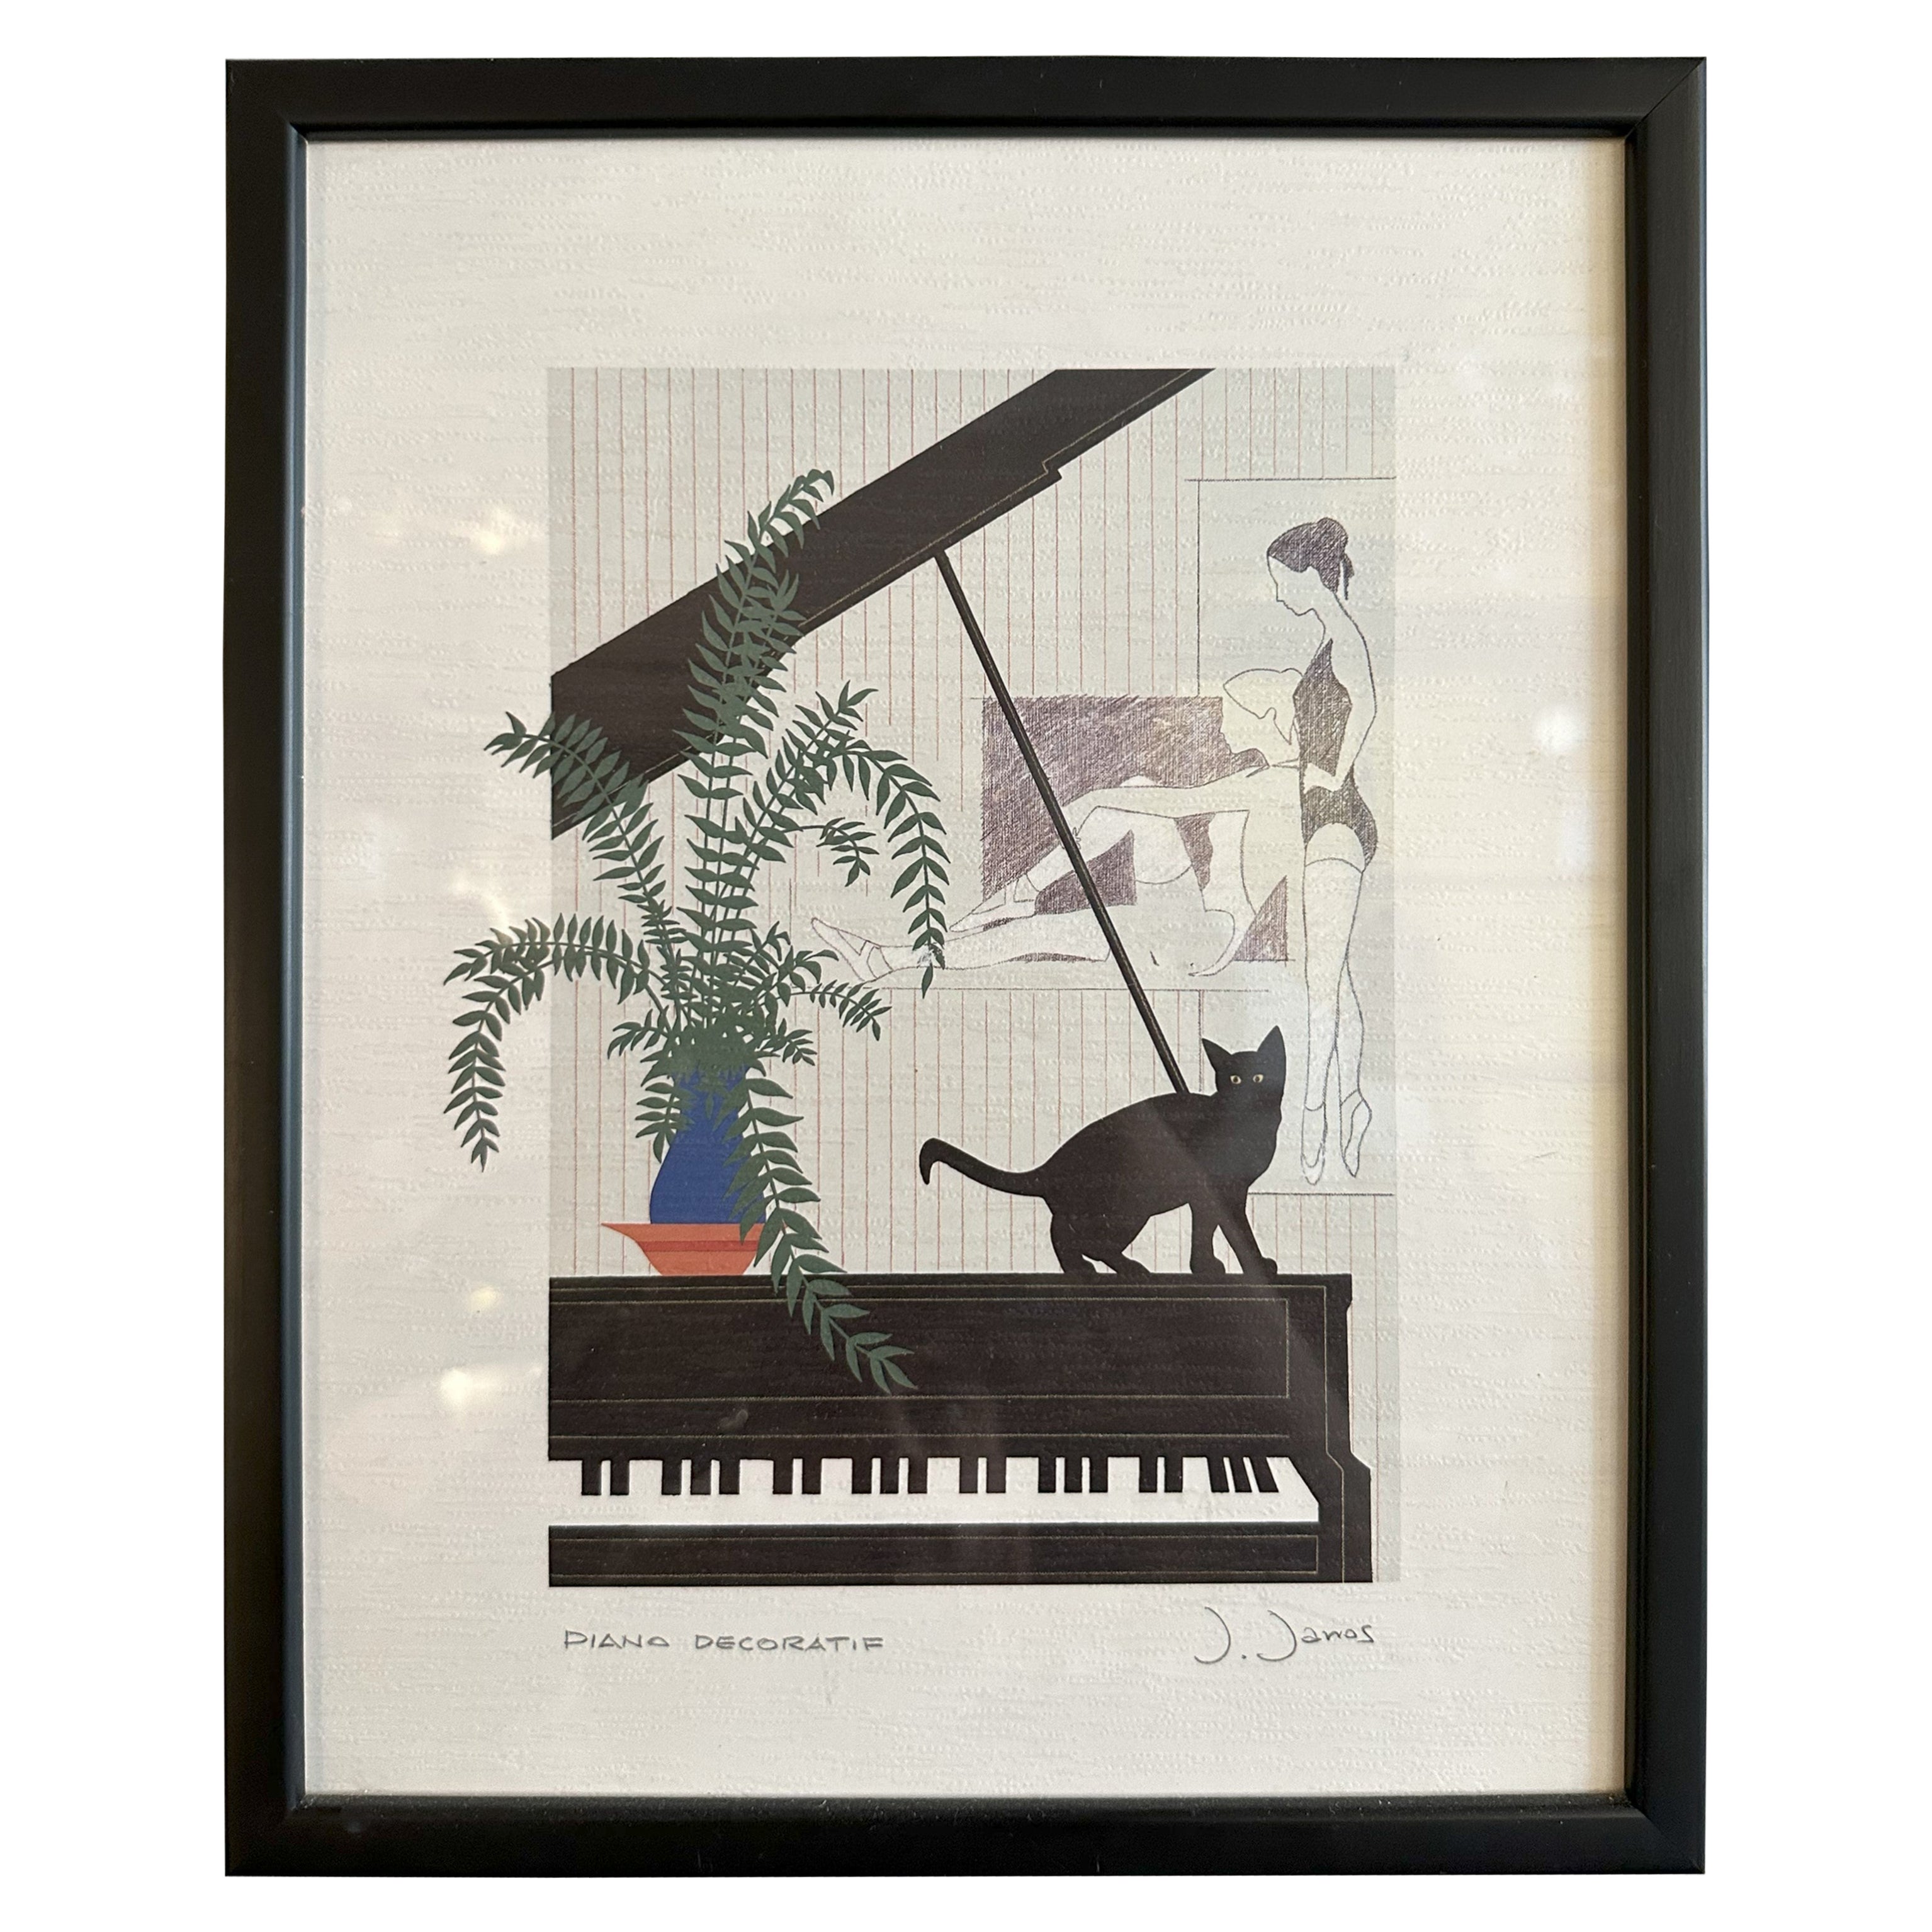 Mid-Century Modern 'PIANO DECORATIF' lithograph print by J. Janos  For Sale